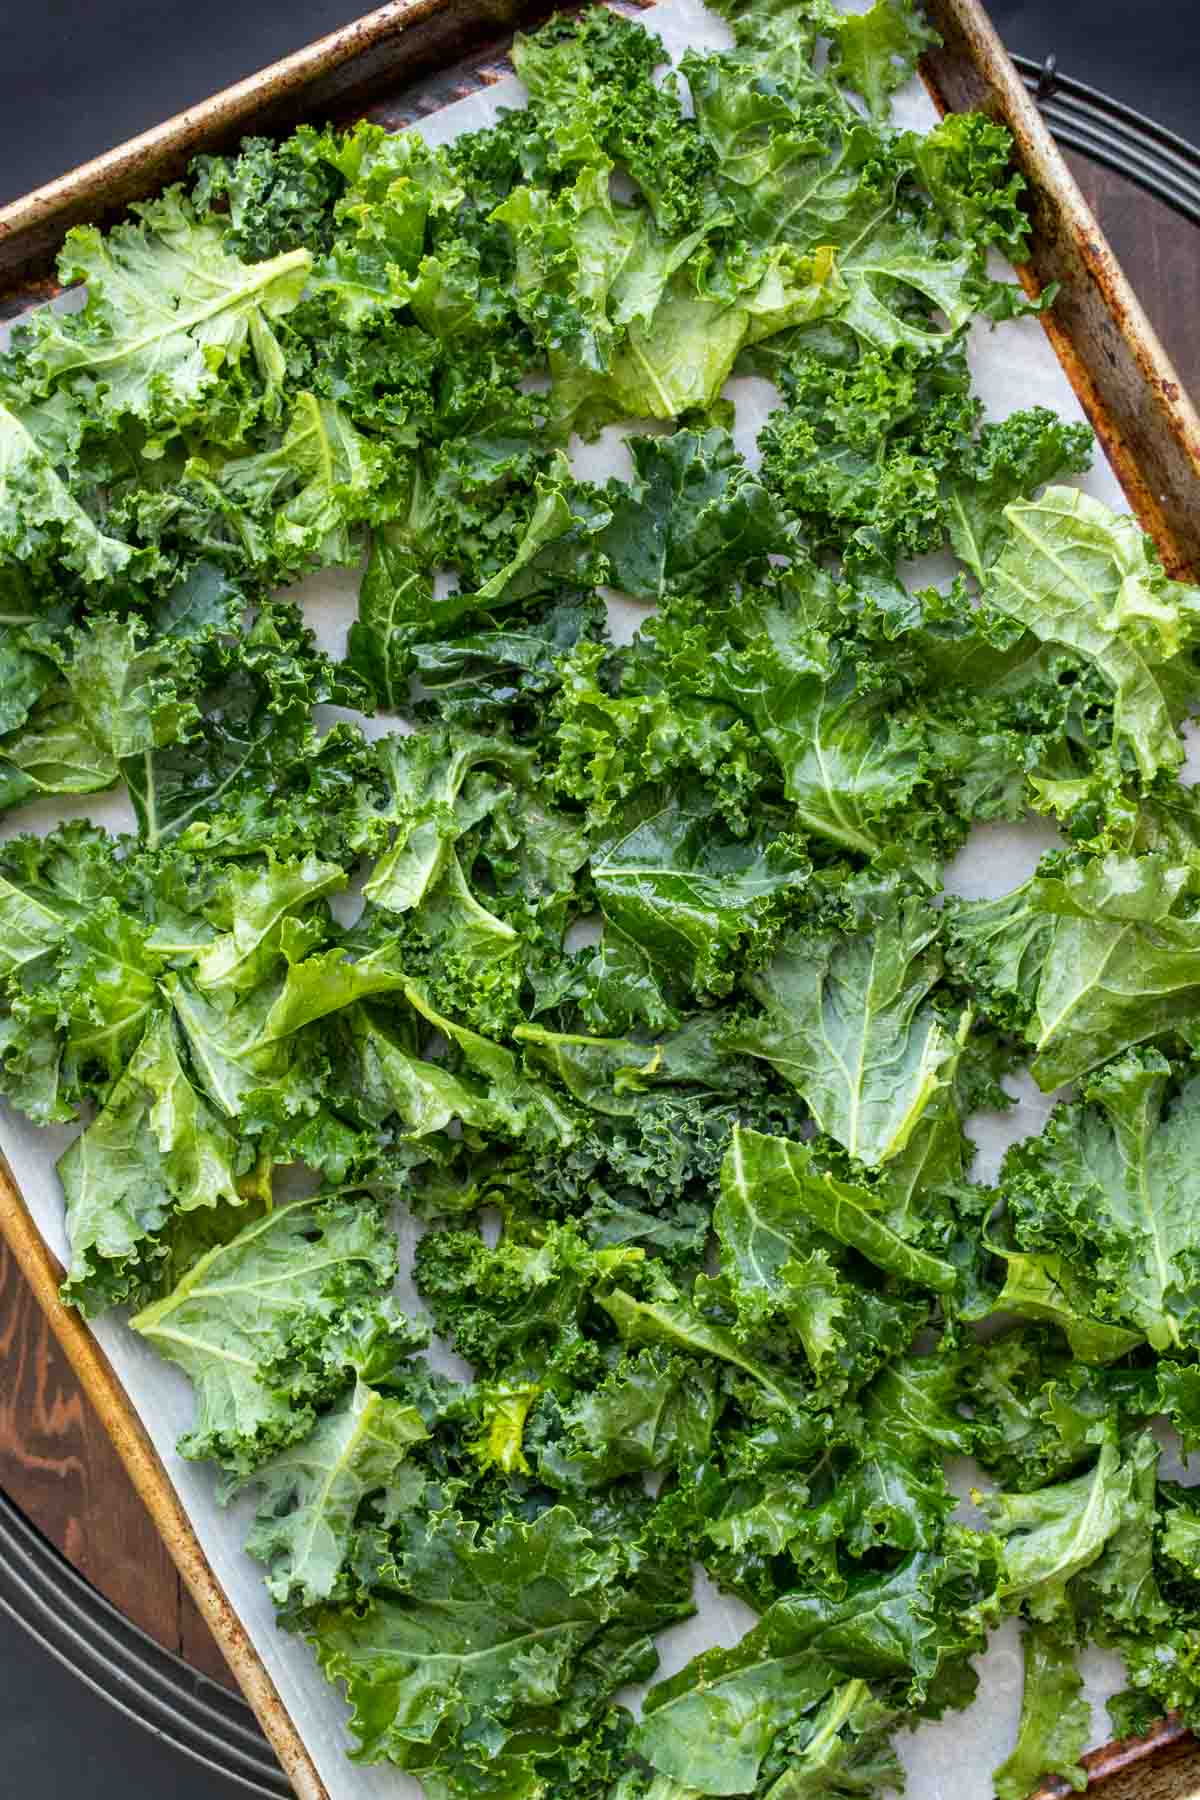 Cut pieces of kale coated in oil on a baking sheet